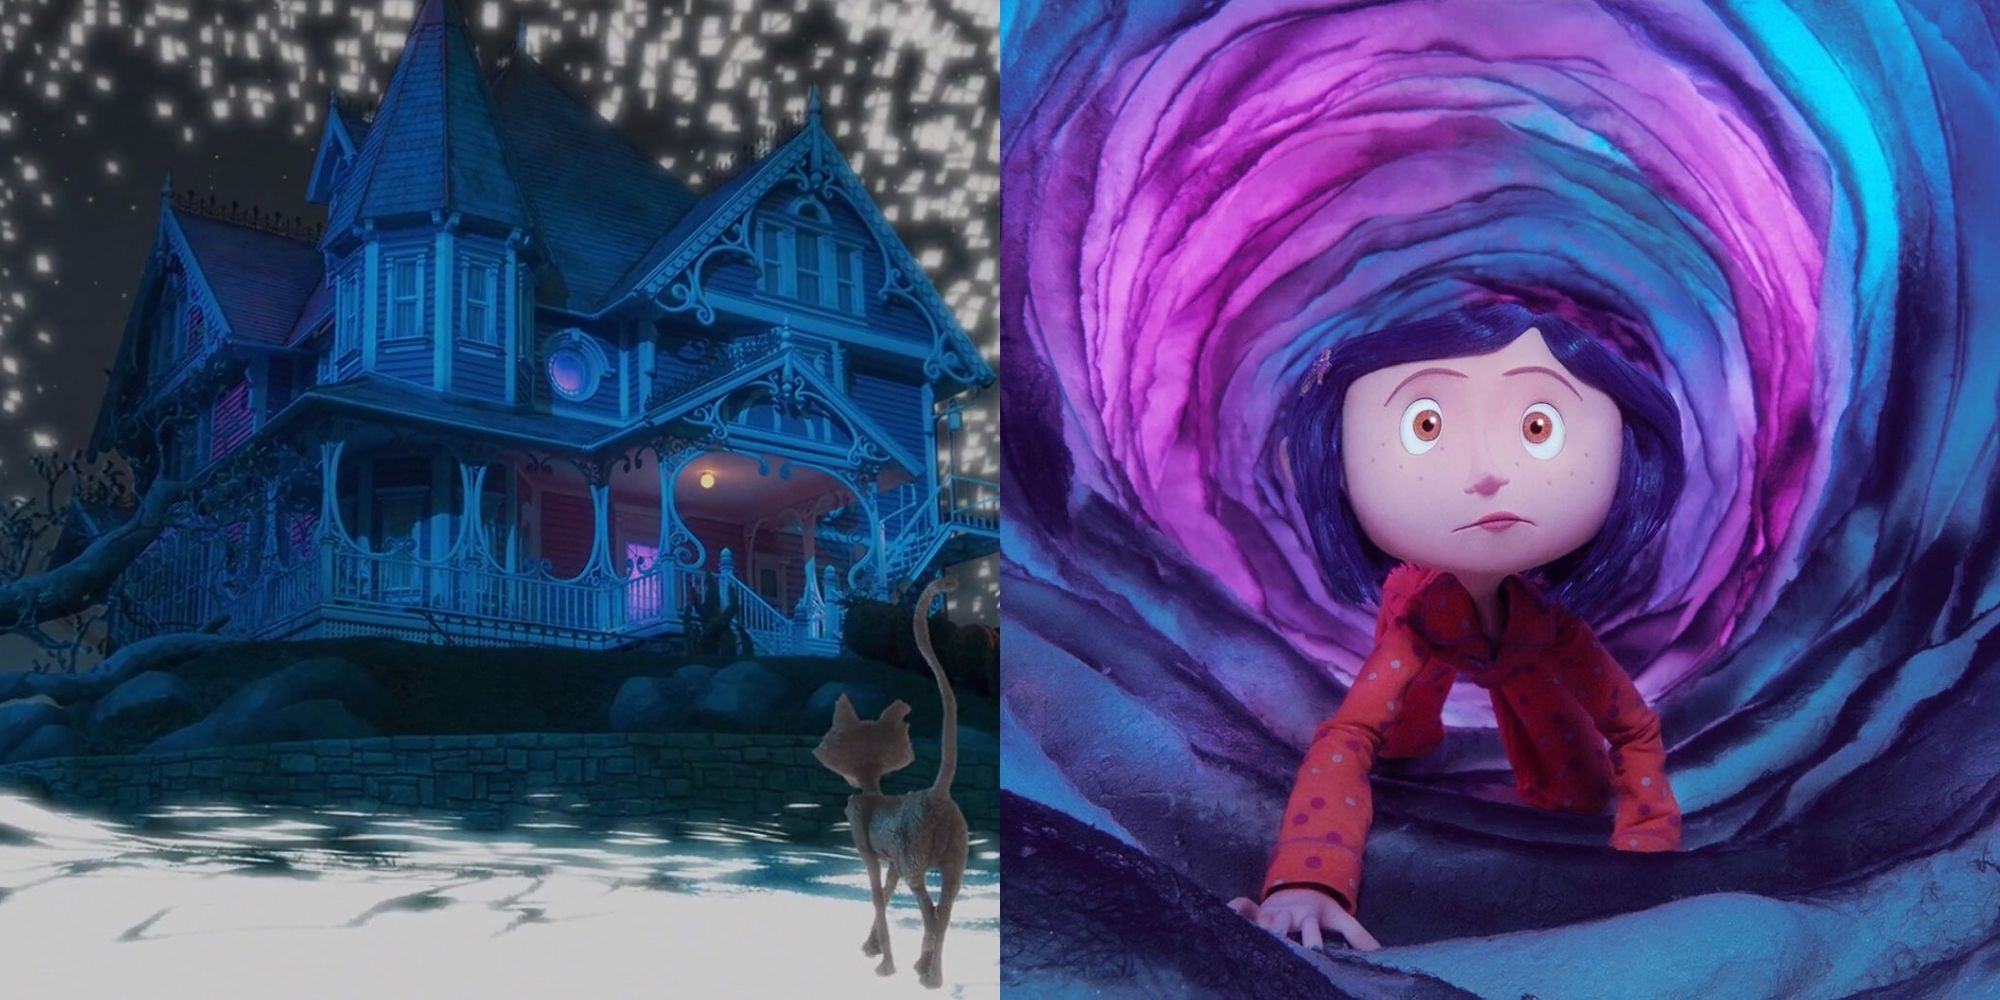 The Other World in Coraline